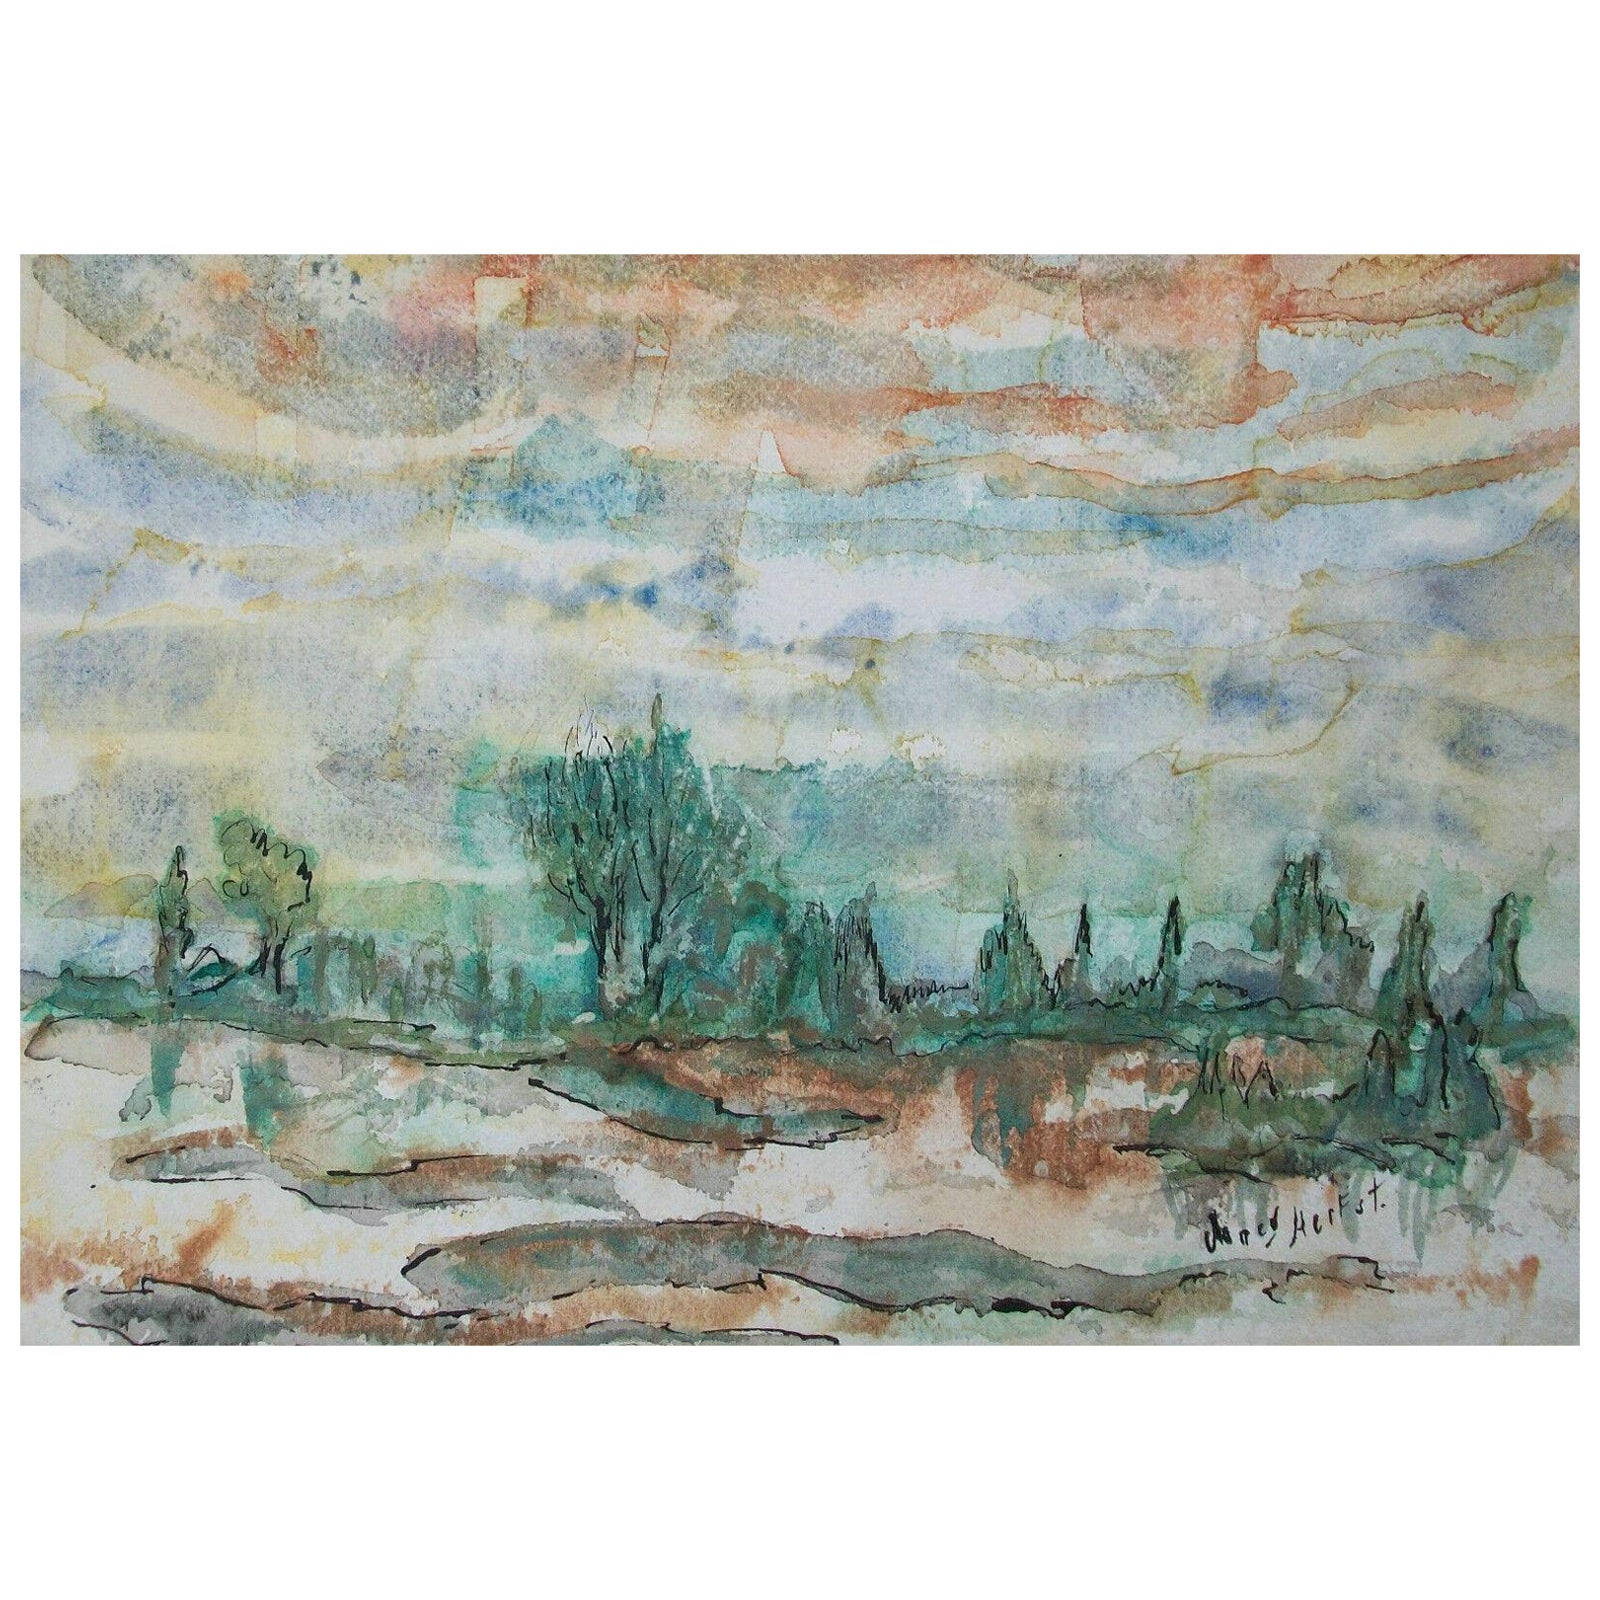 NANCY HERFST - Expressionist Watercolor Painting - Signed - Canada - Circa 1977